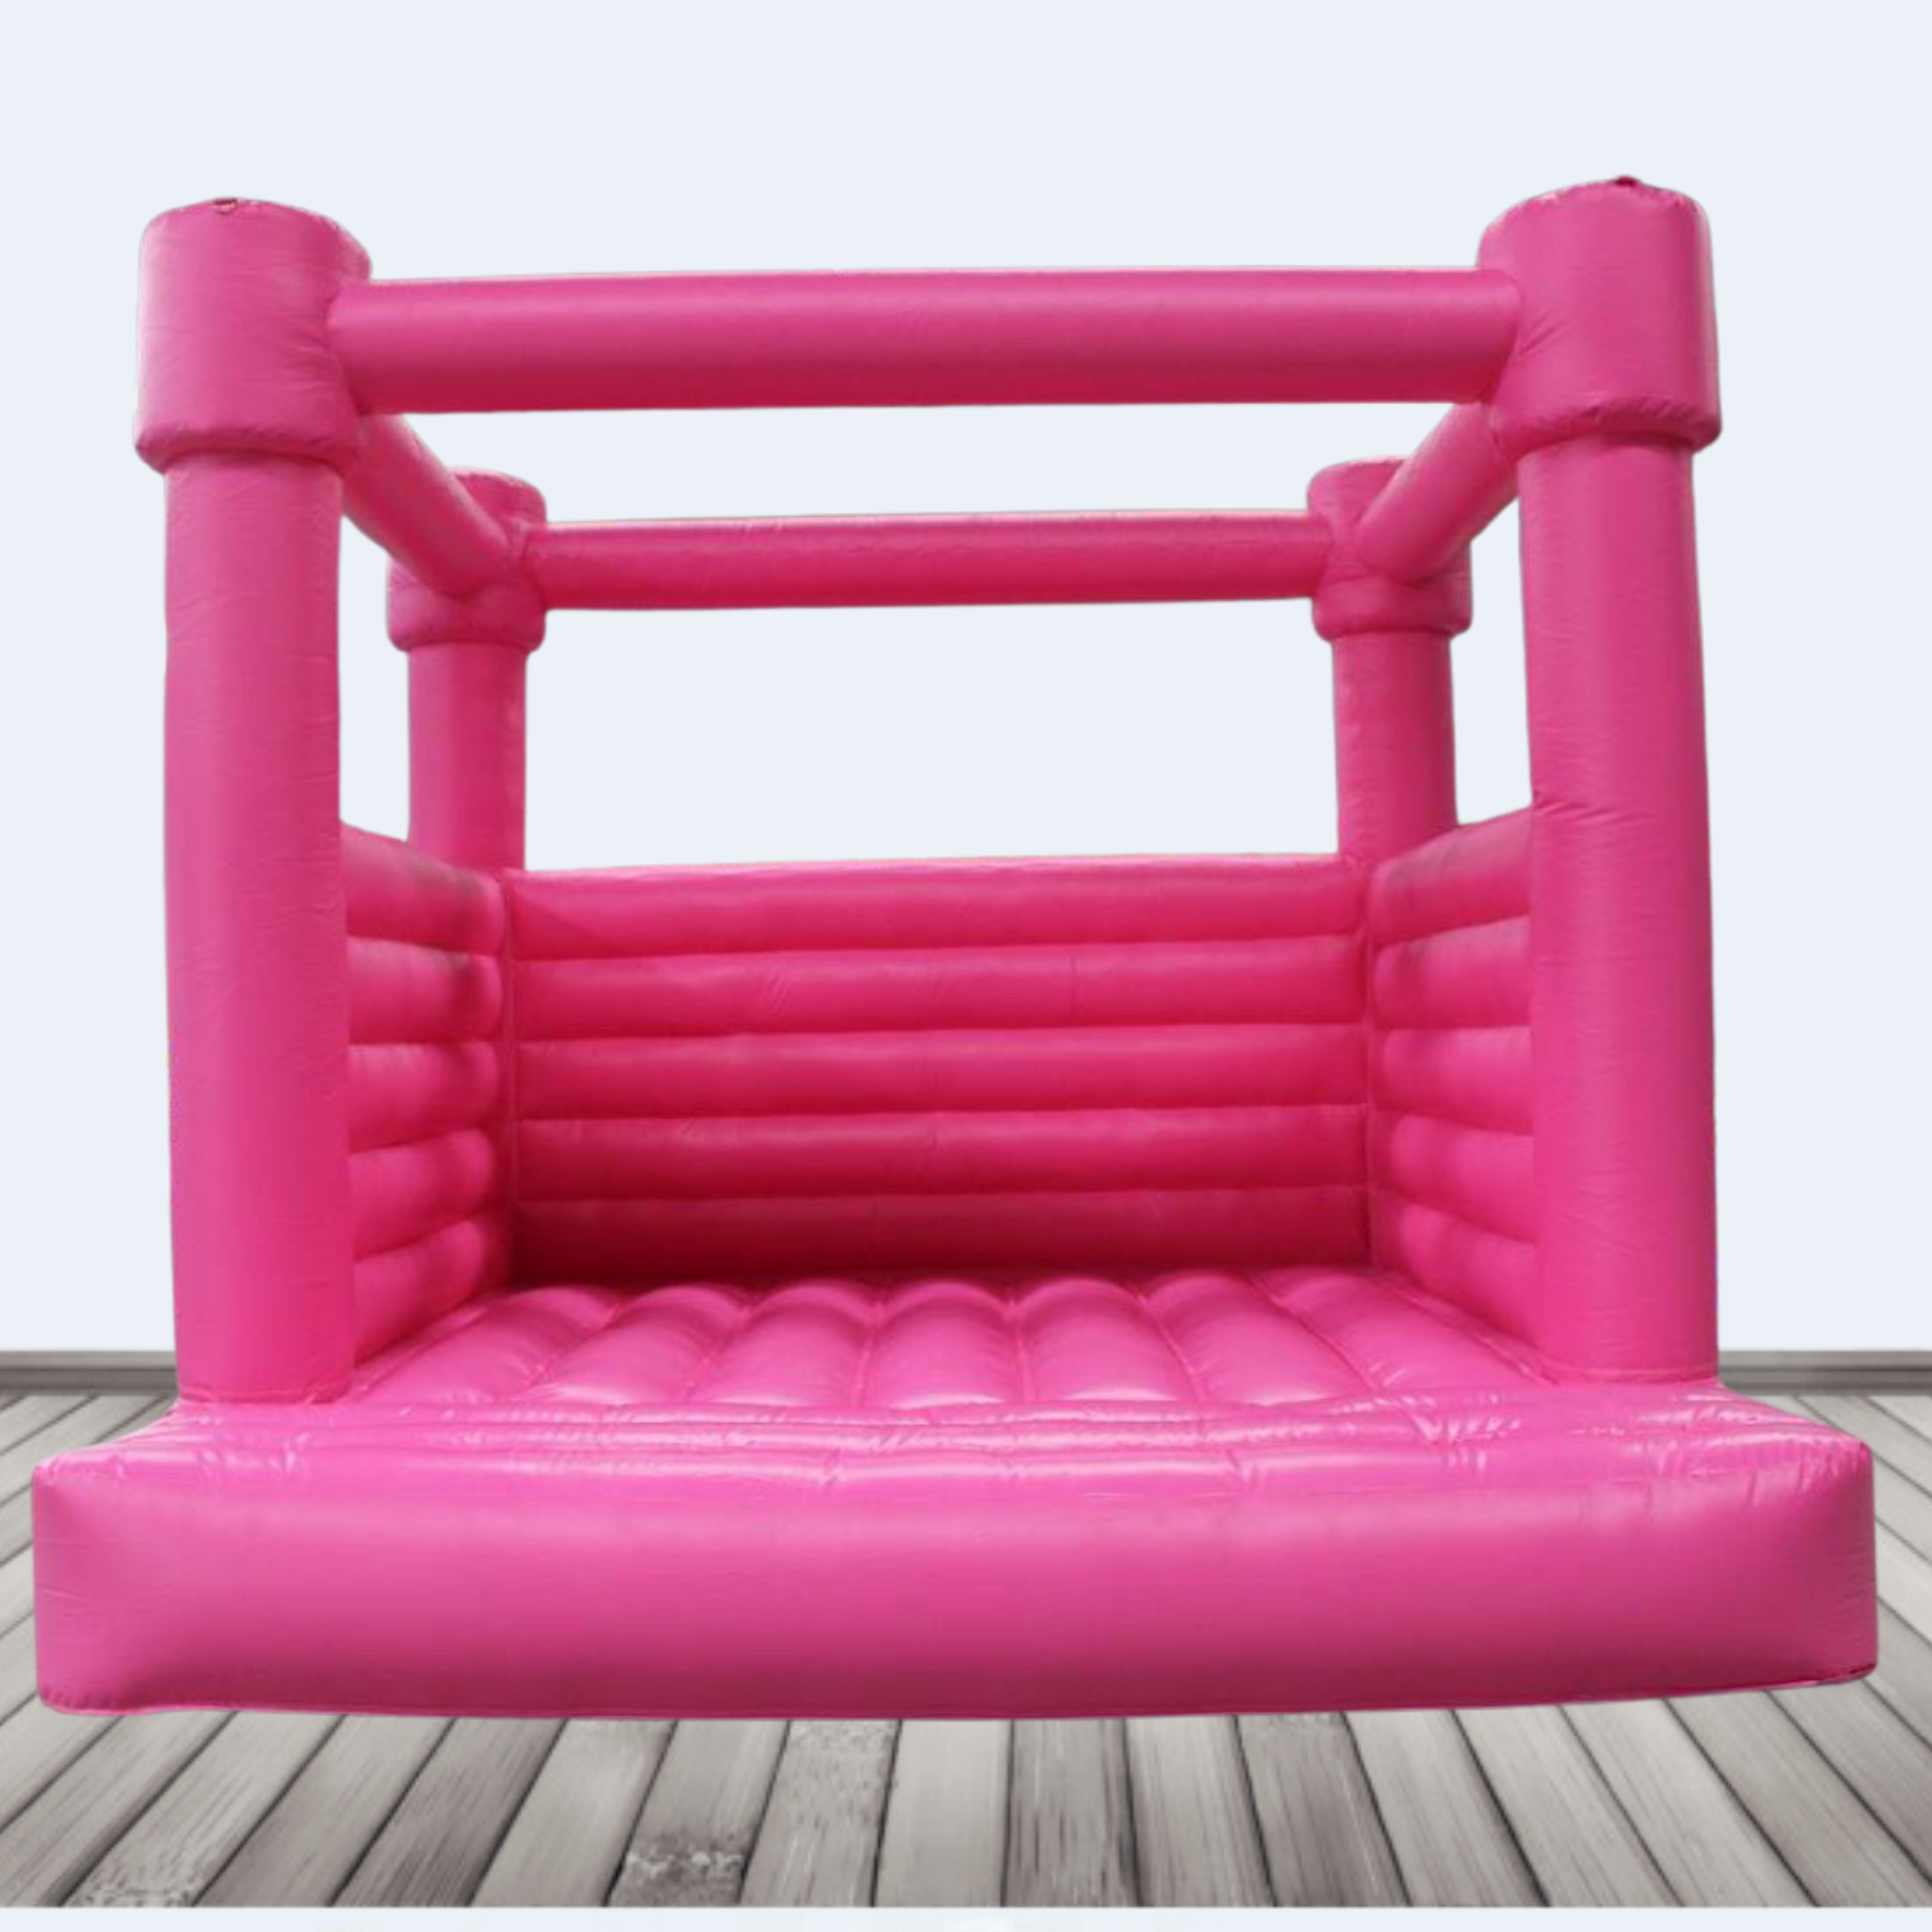 Hot Pink Bounce House.png